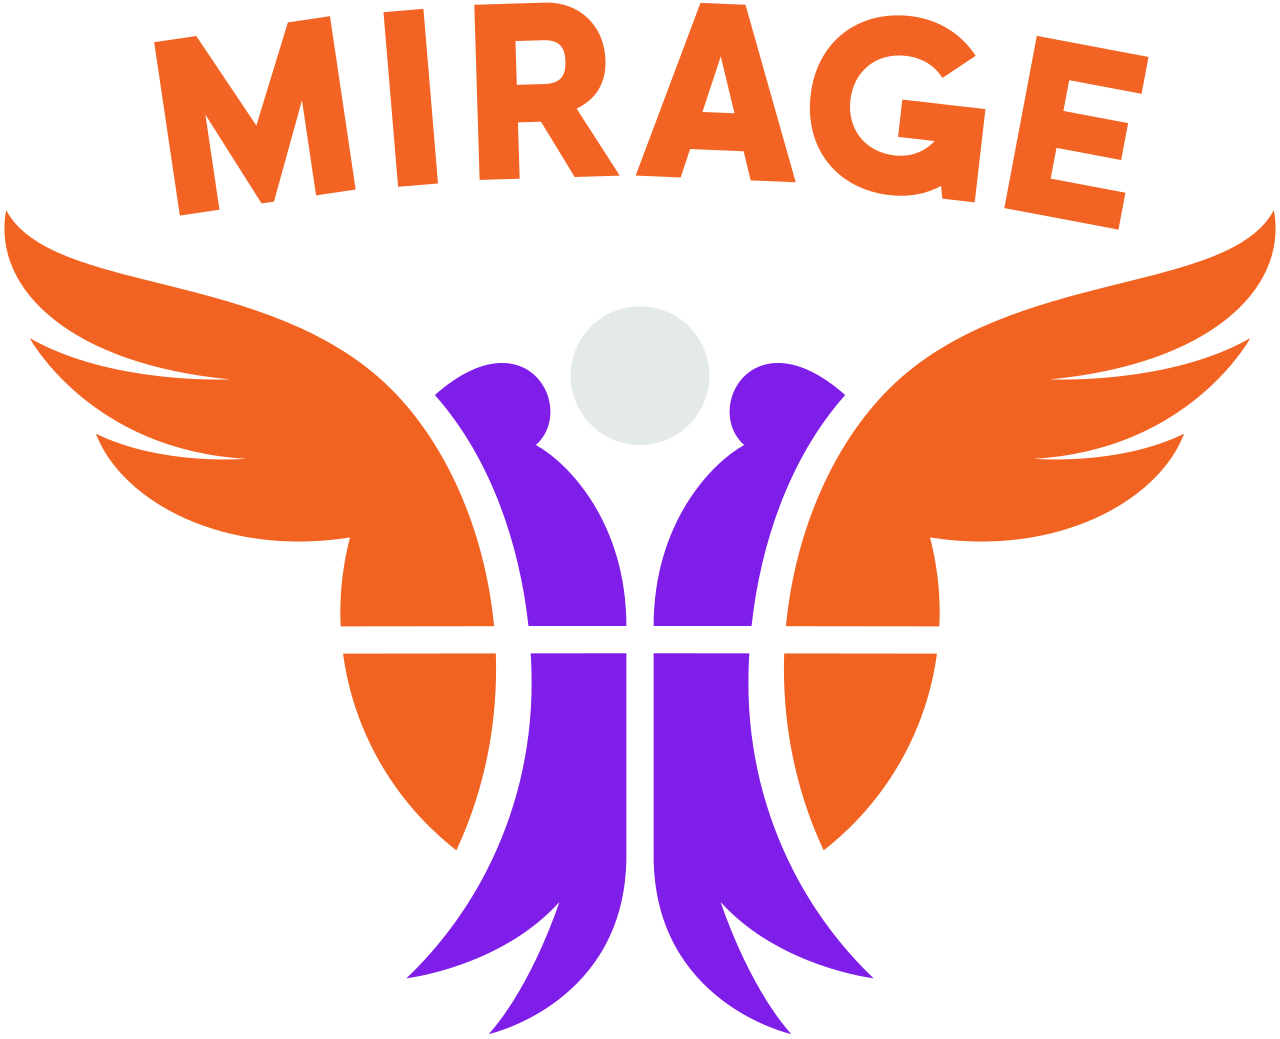  MIRAGE's web page